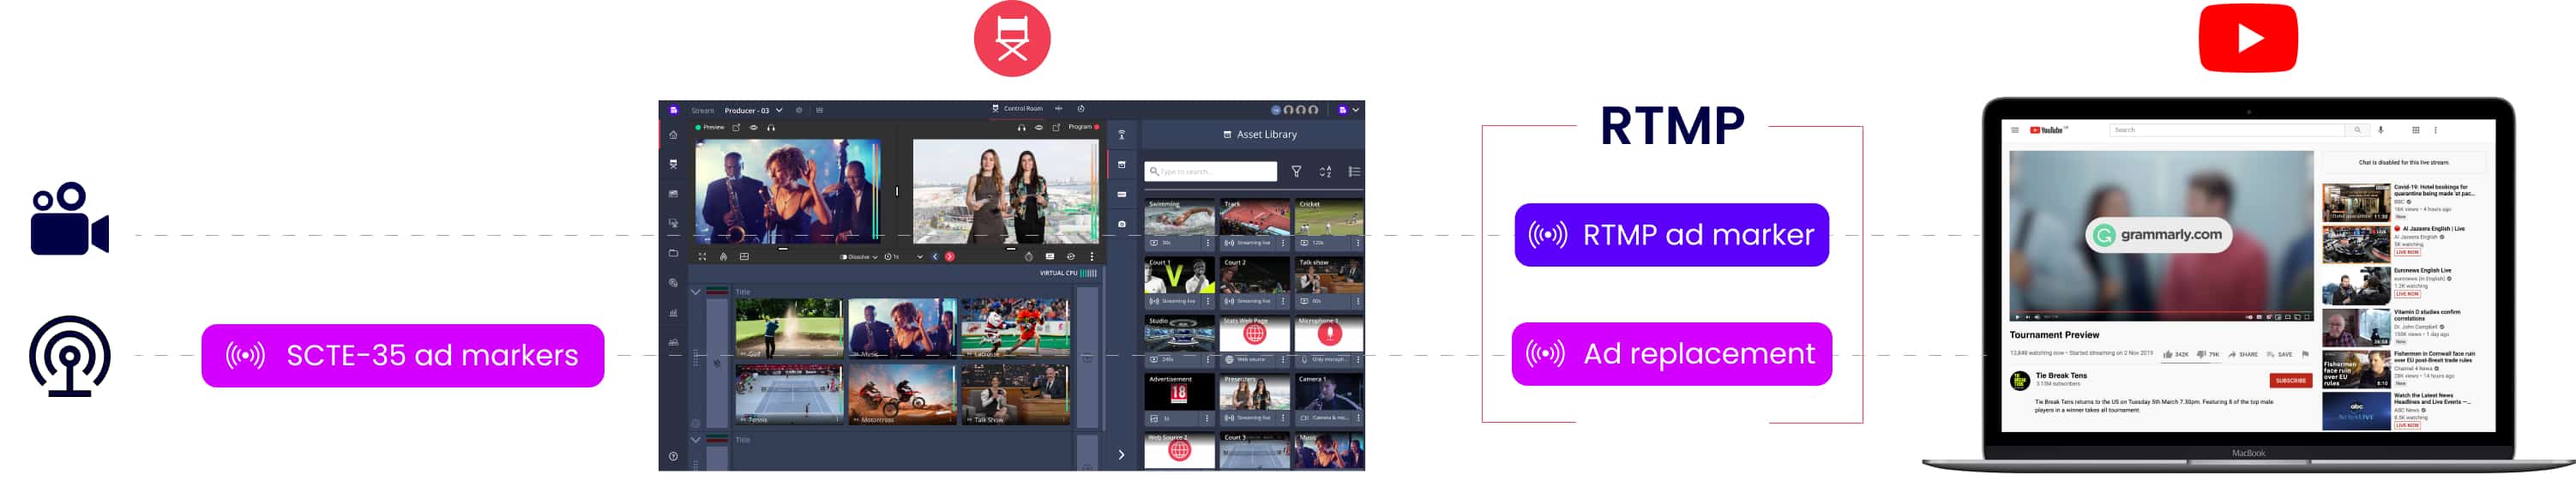 a workflow showing how to monetize live streams on youtube using RTMP ad markers and SCTE-35 ad replacement in Grabyo